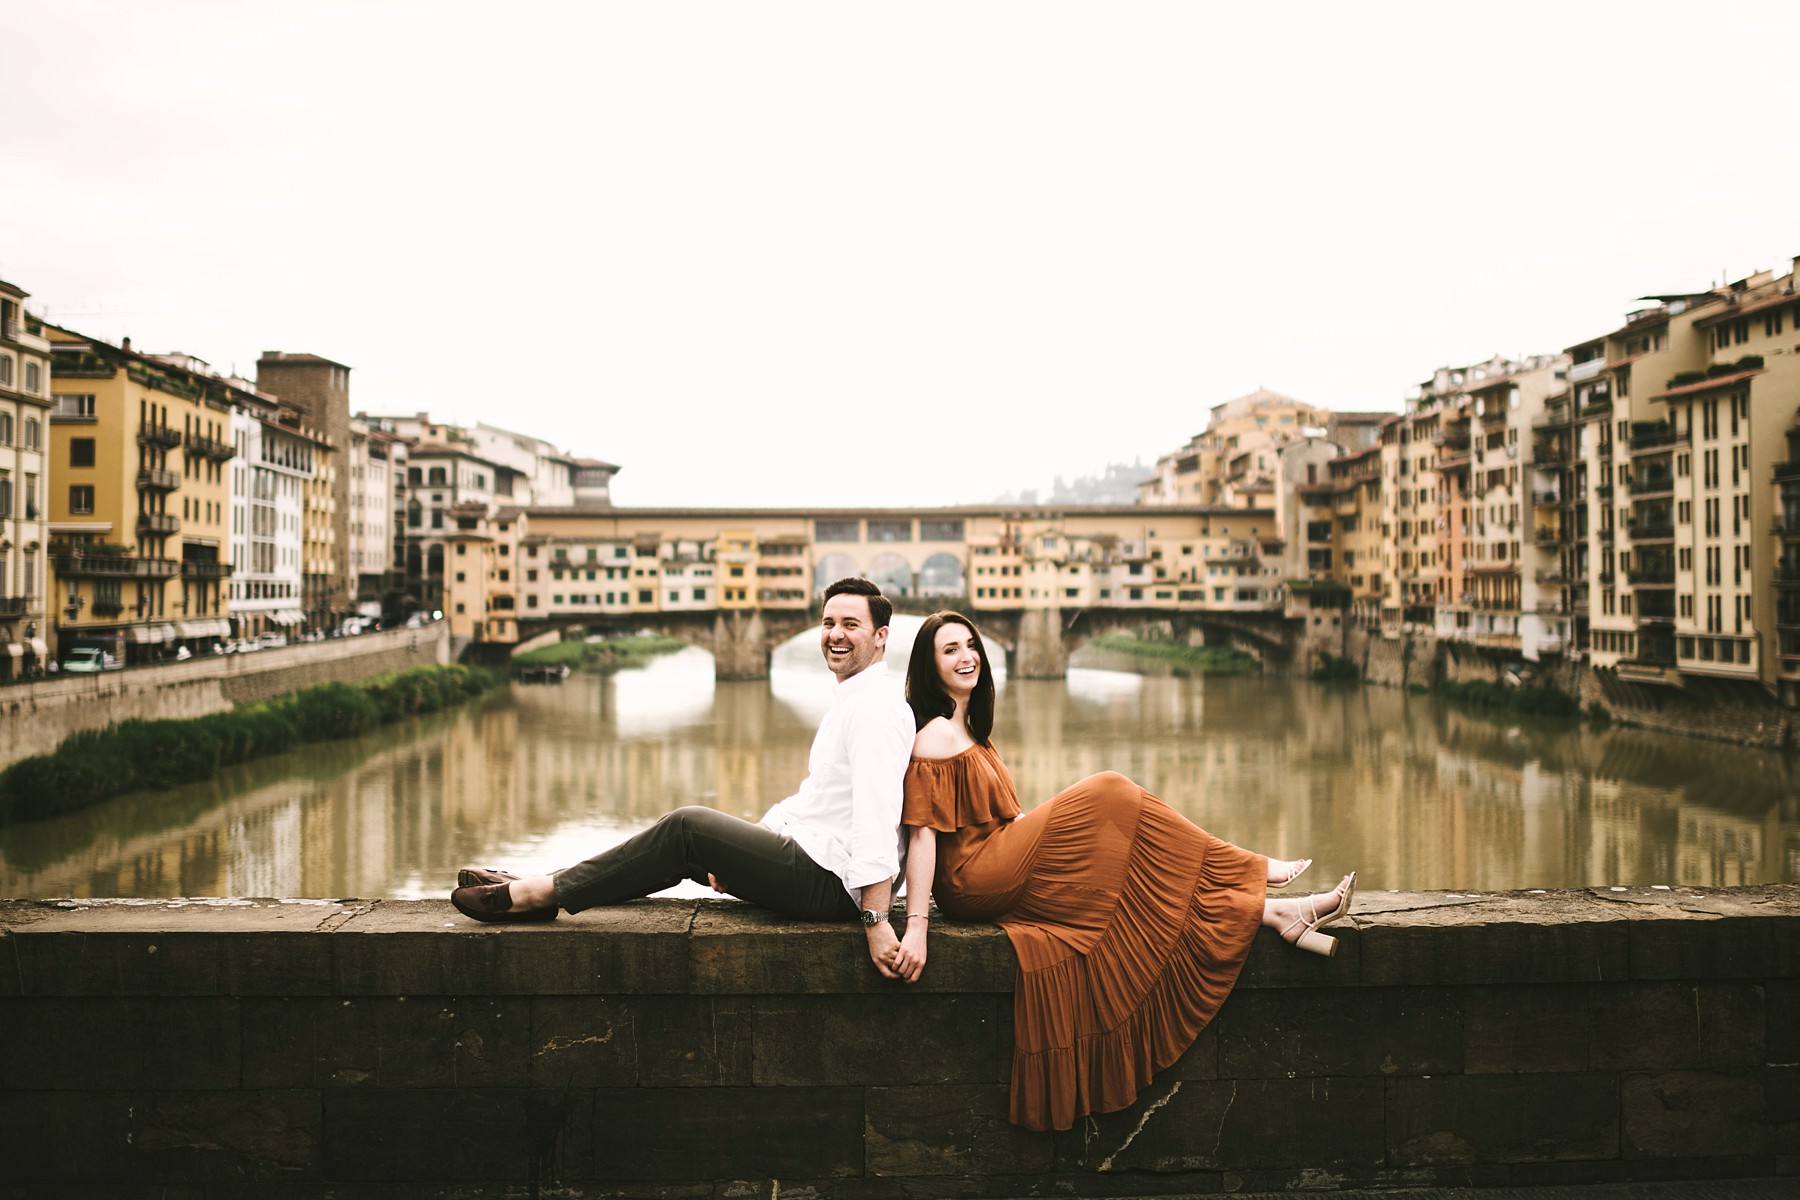 Creative and fun couple engagement photo shoot near Old Bridge in Florence. Sunrise photo session with no tourists down the streets